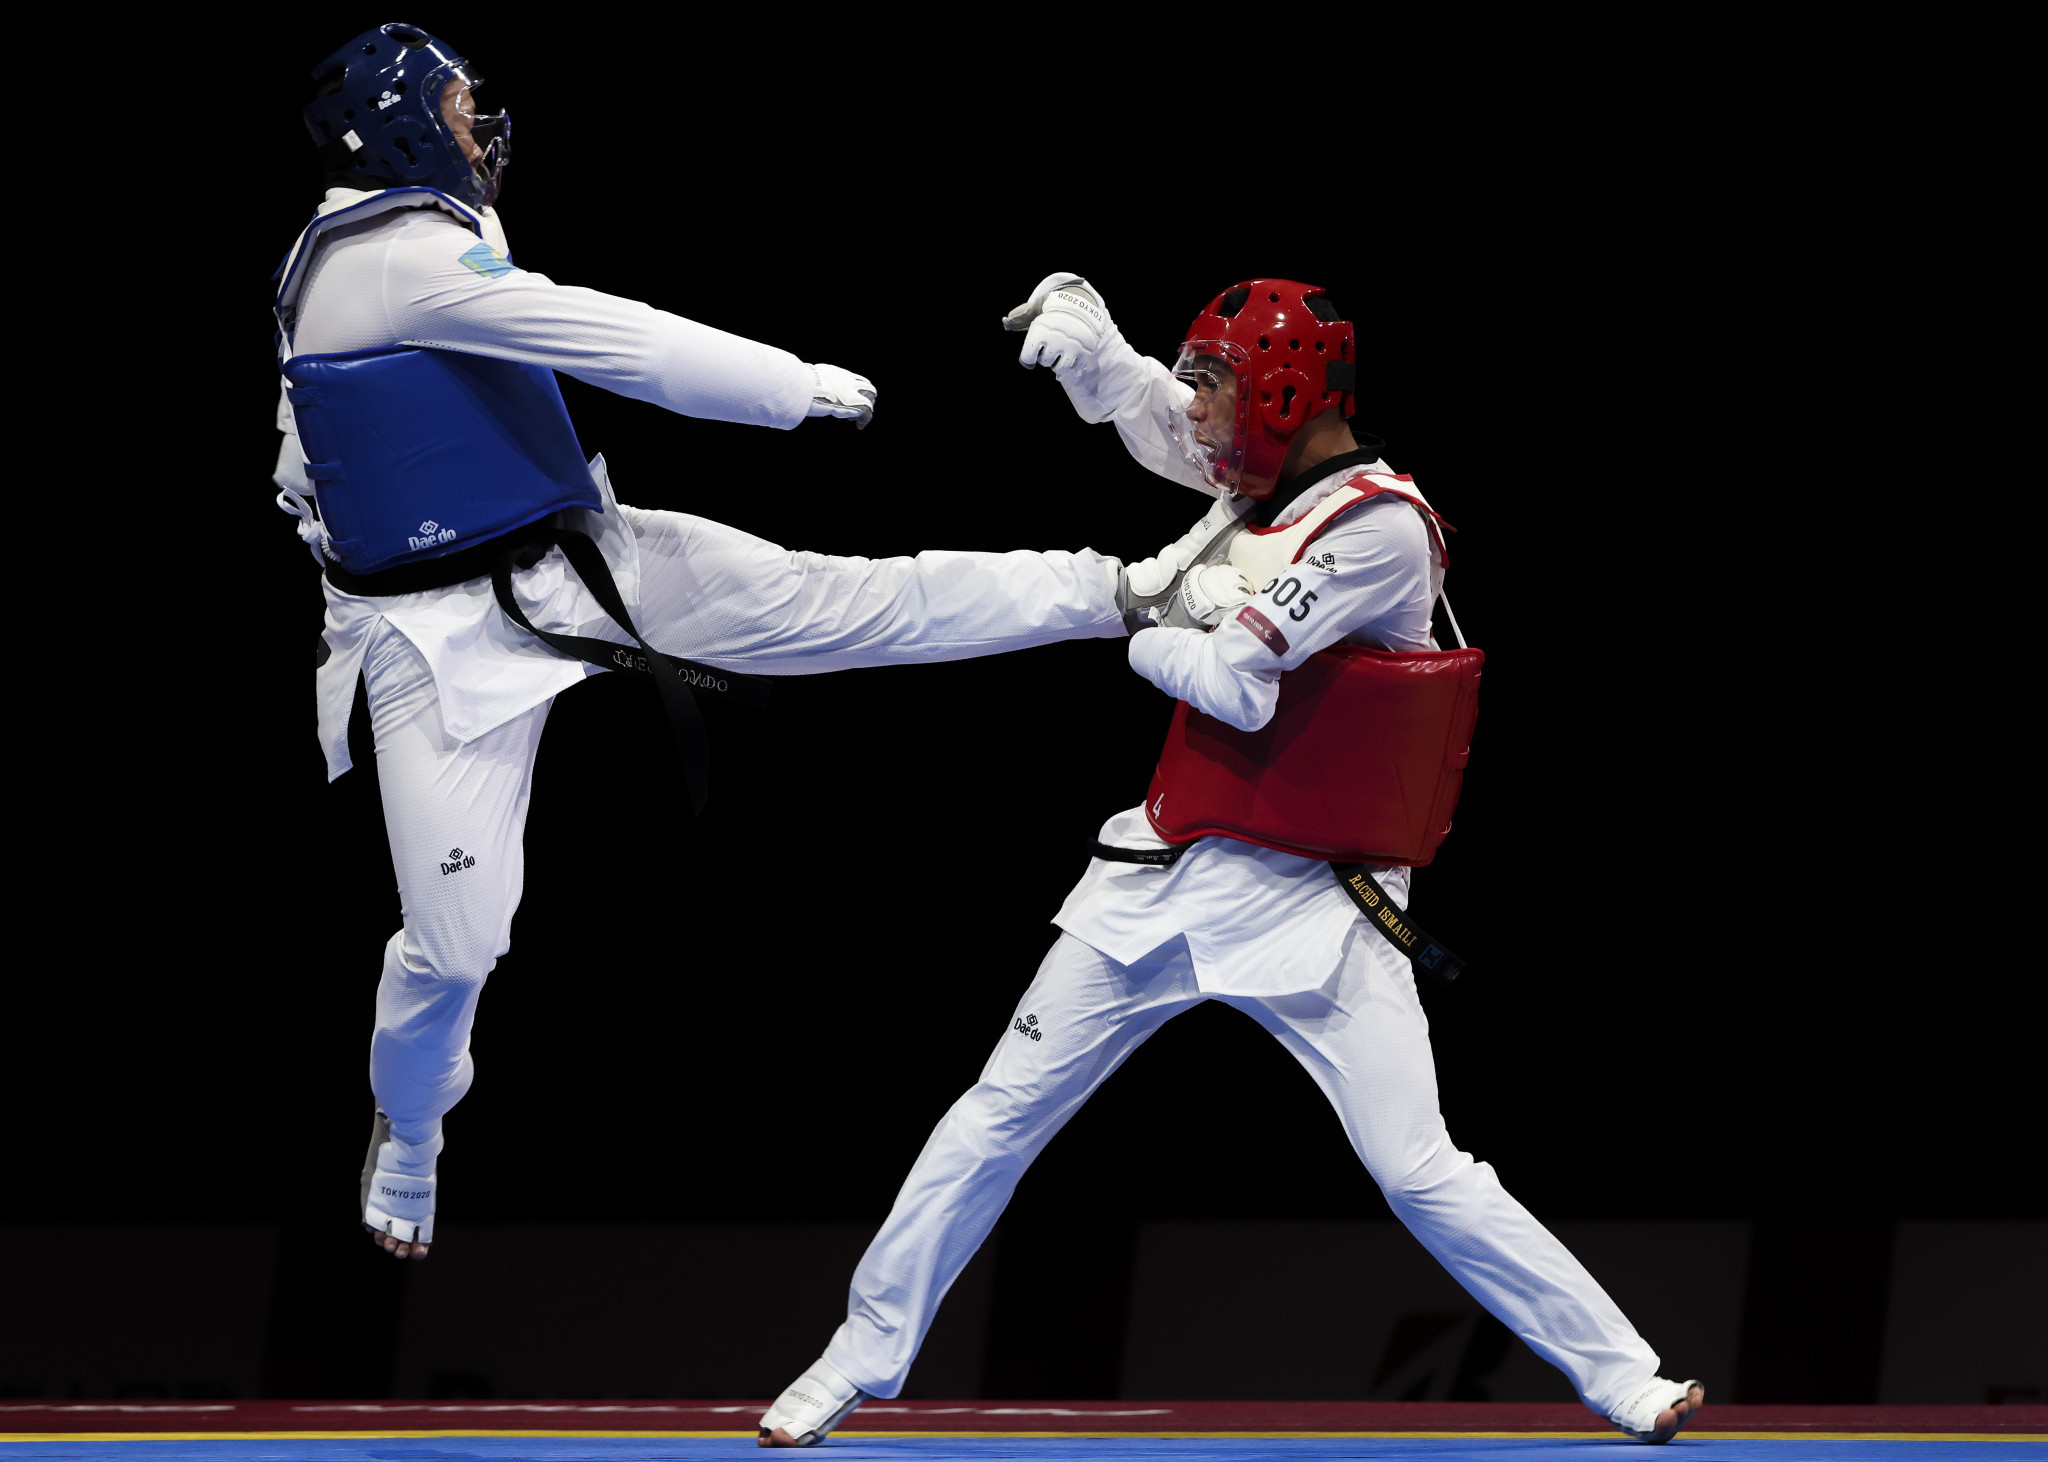 Para taekwondo made its Paralympic debut at Tokyo 2020, and will include four more weight divisions and have 48 additional athletes competing at Paris 2024 ©Getty Images